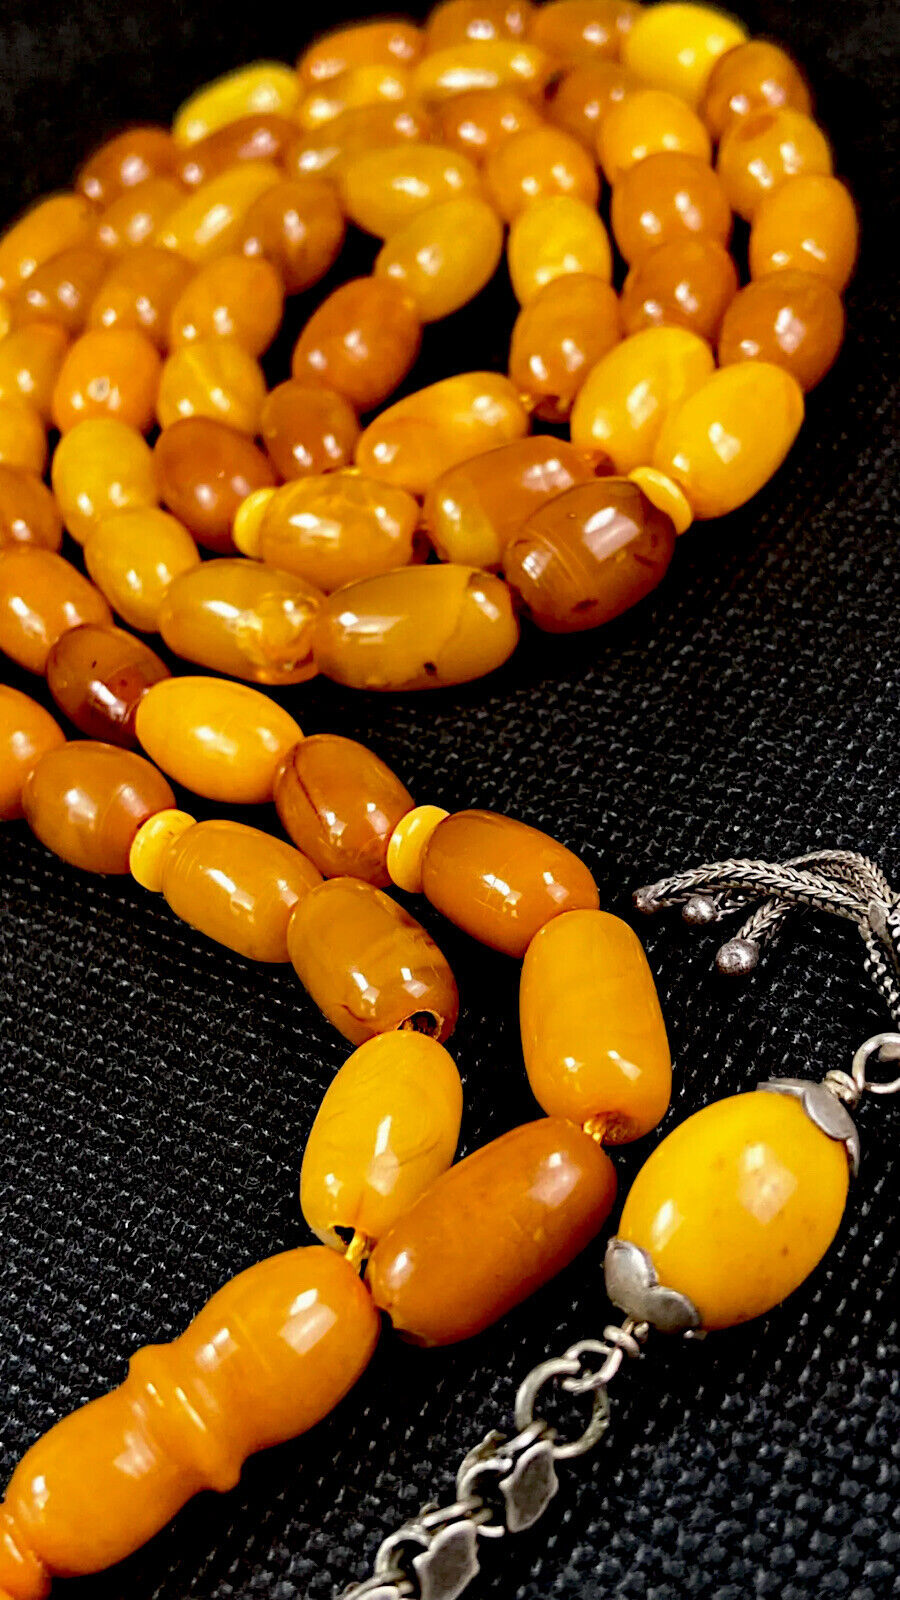 SUPER RARE CERTIFIED ANTIQUE GERMAN NATURAL BALTIC AMBER ROSARY 66 Beads 55GR.